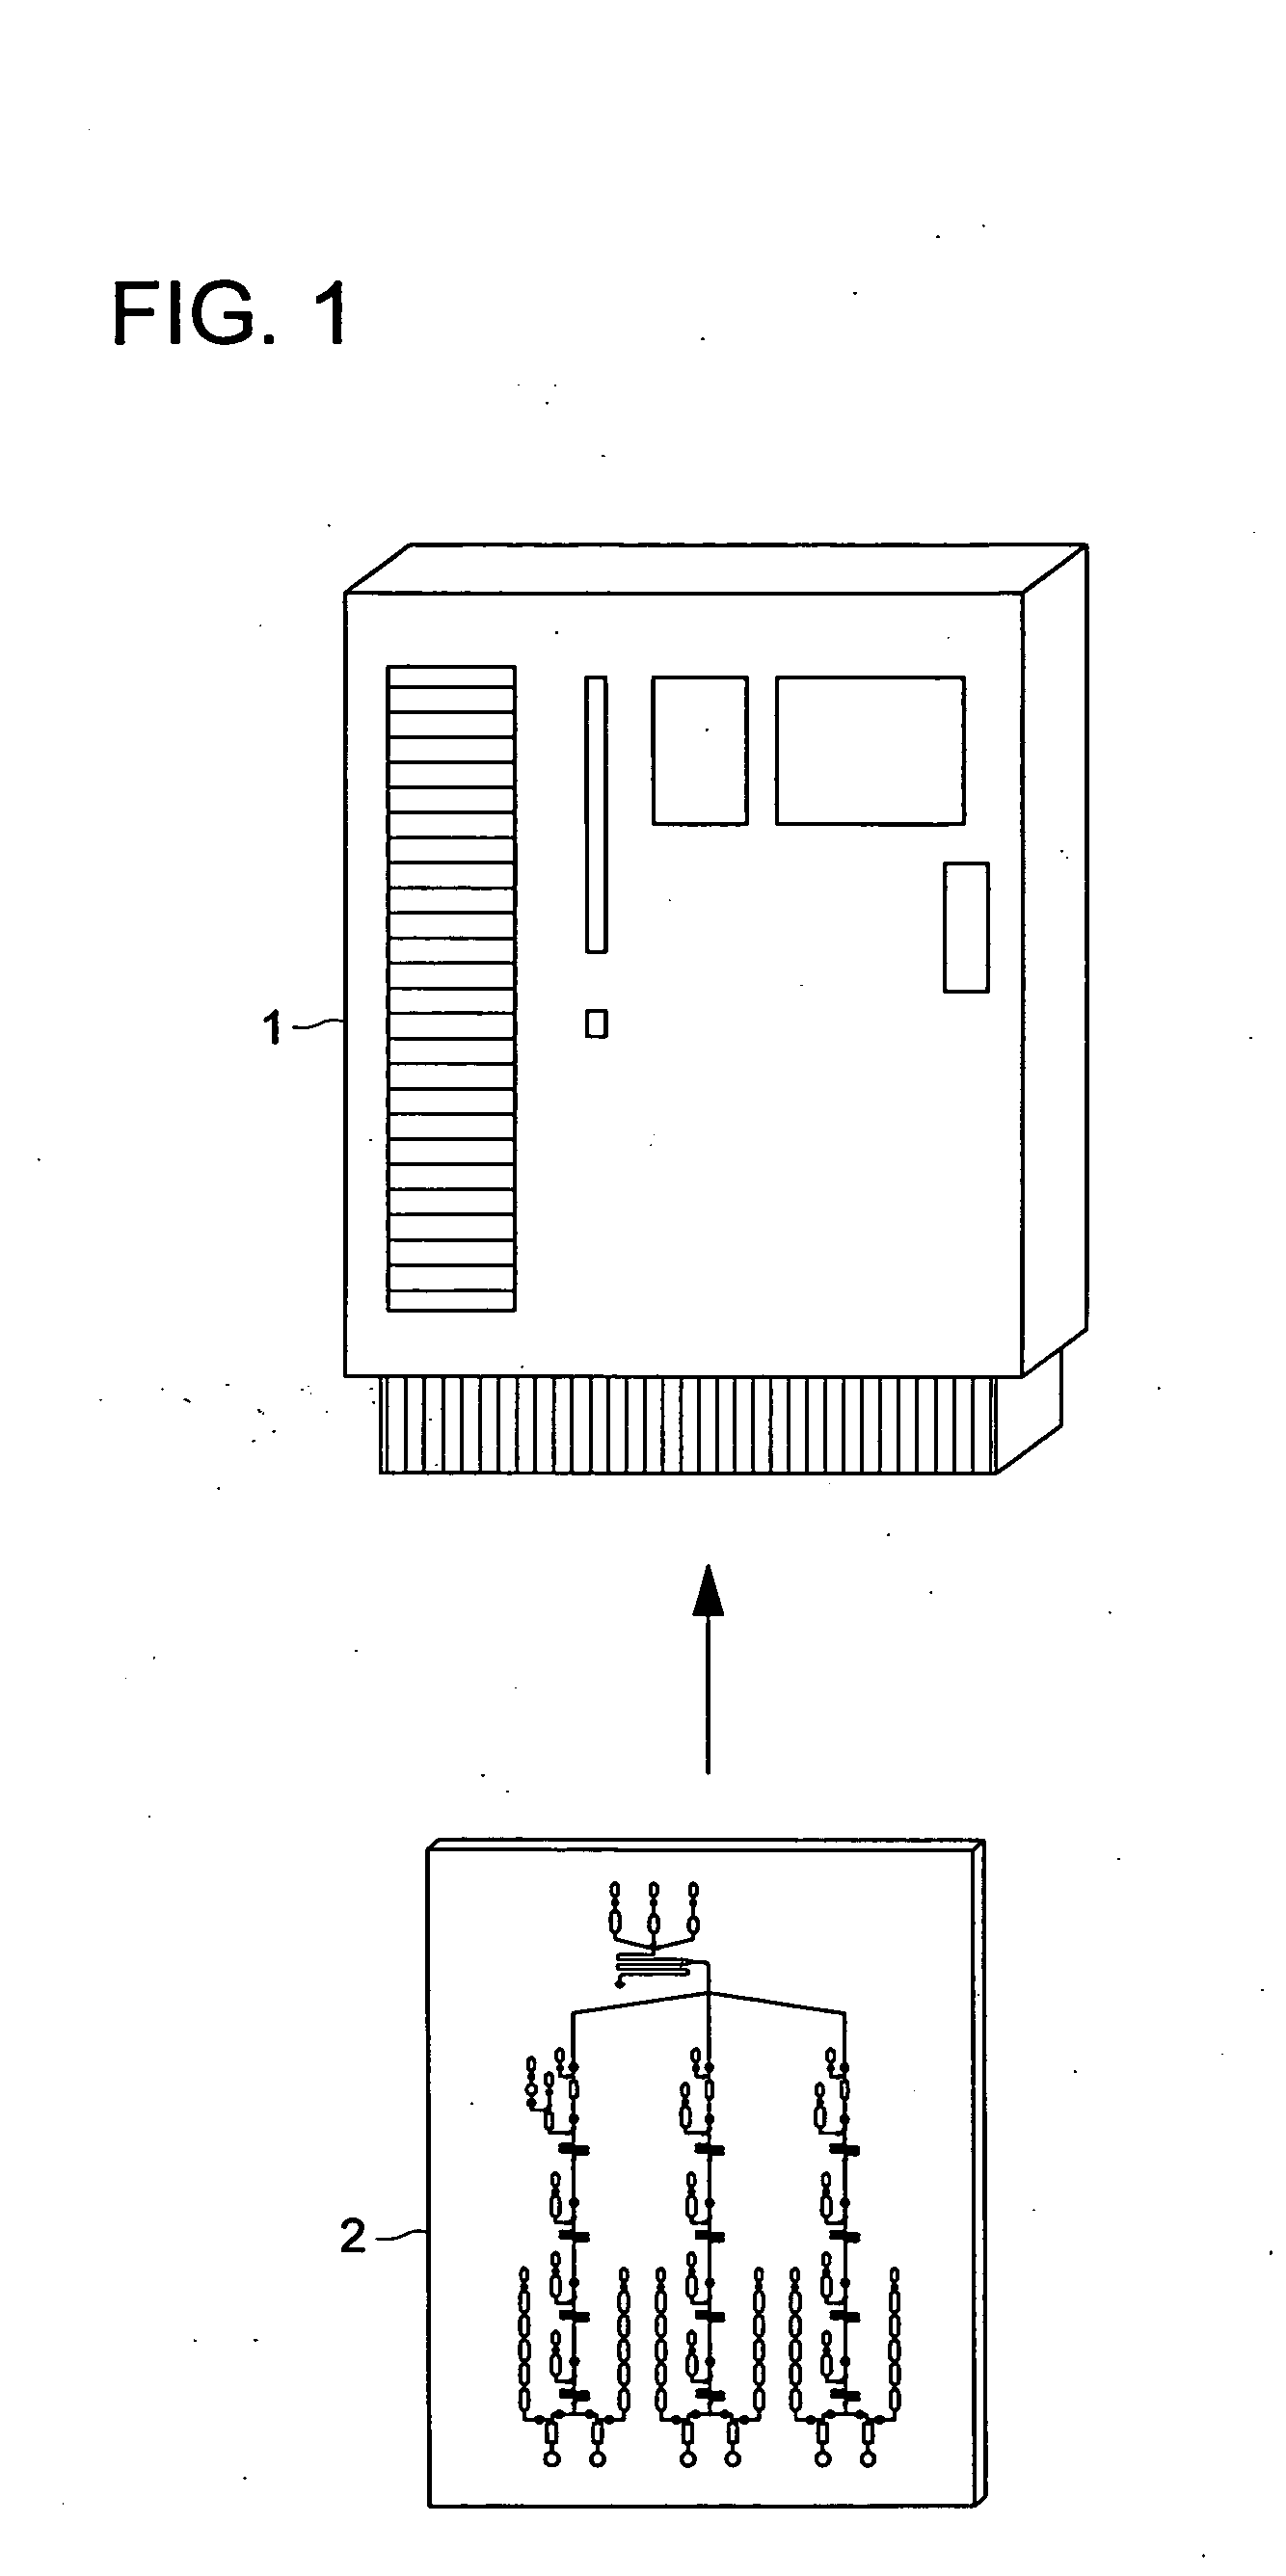 Inspection microchip and inspection device using the chip